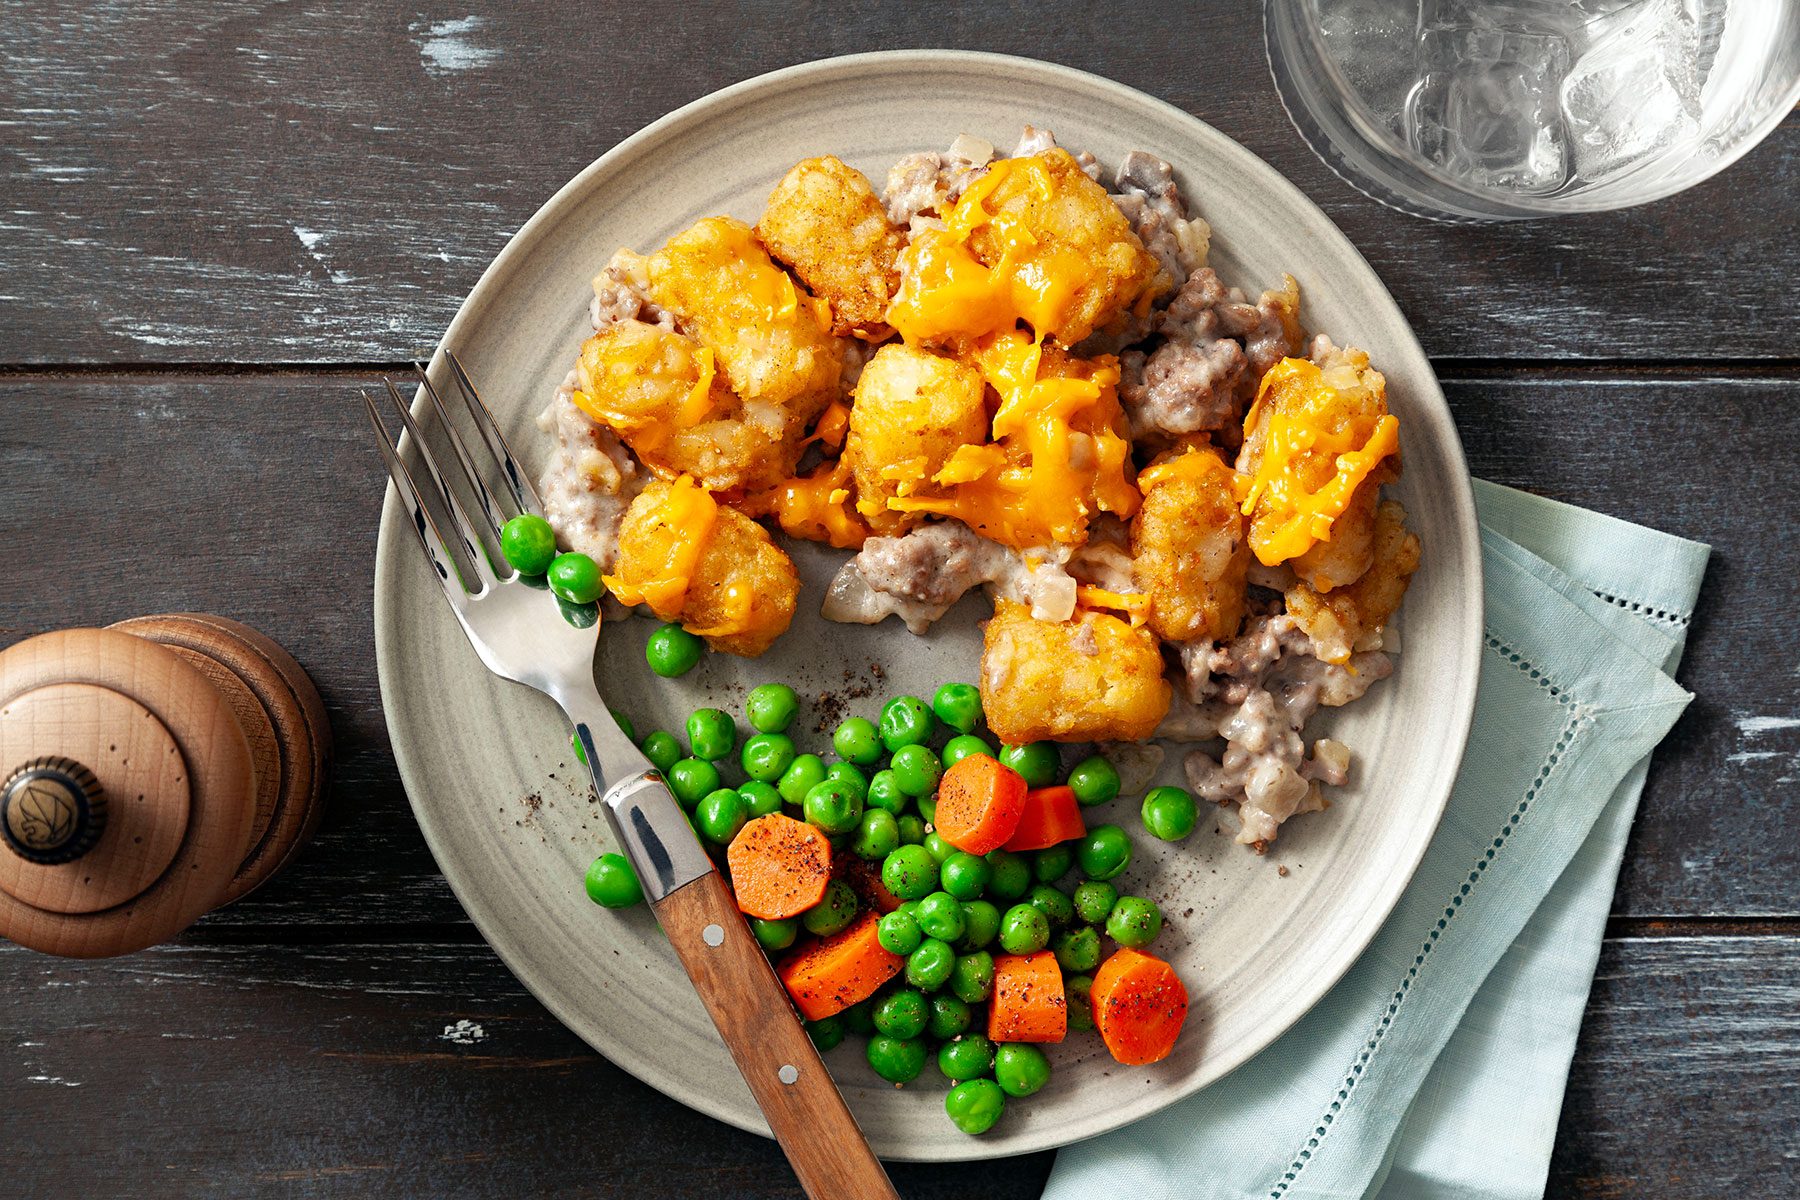 Tater Tot Casserole served on plate with peas and other vegetables 